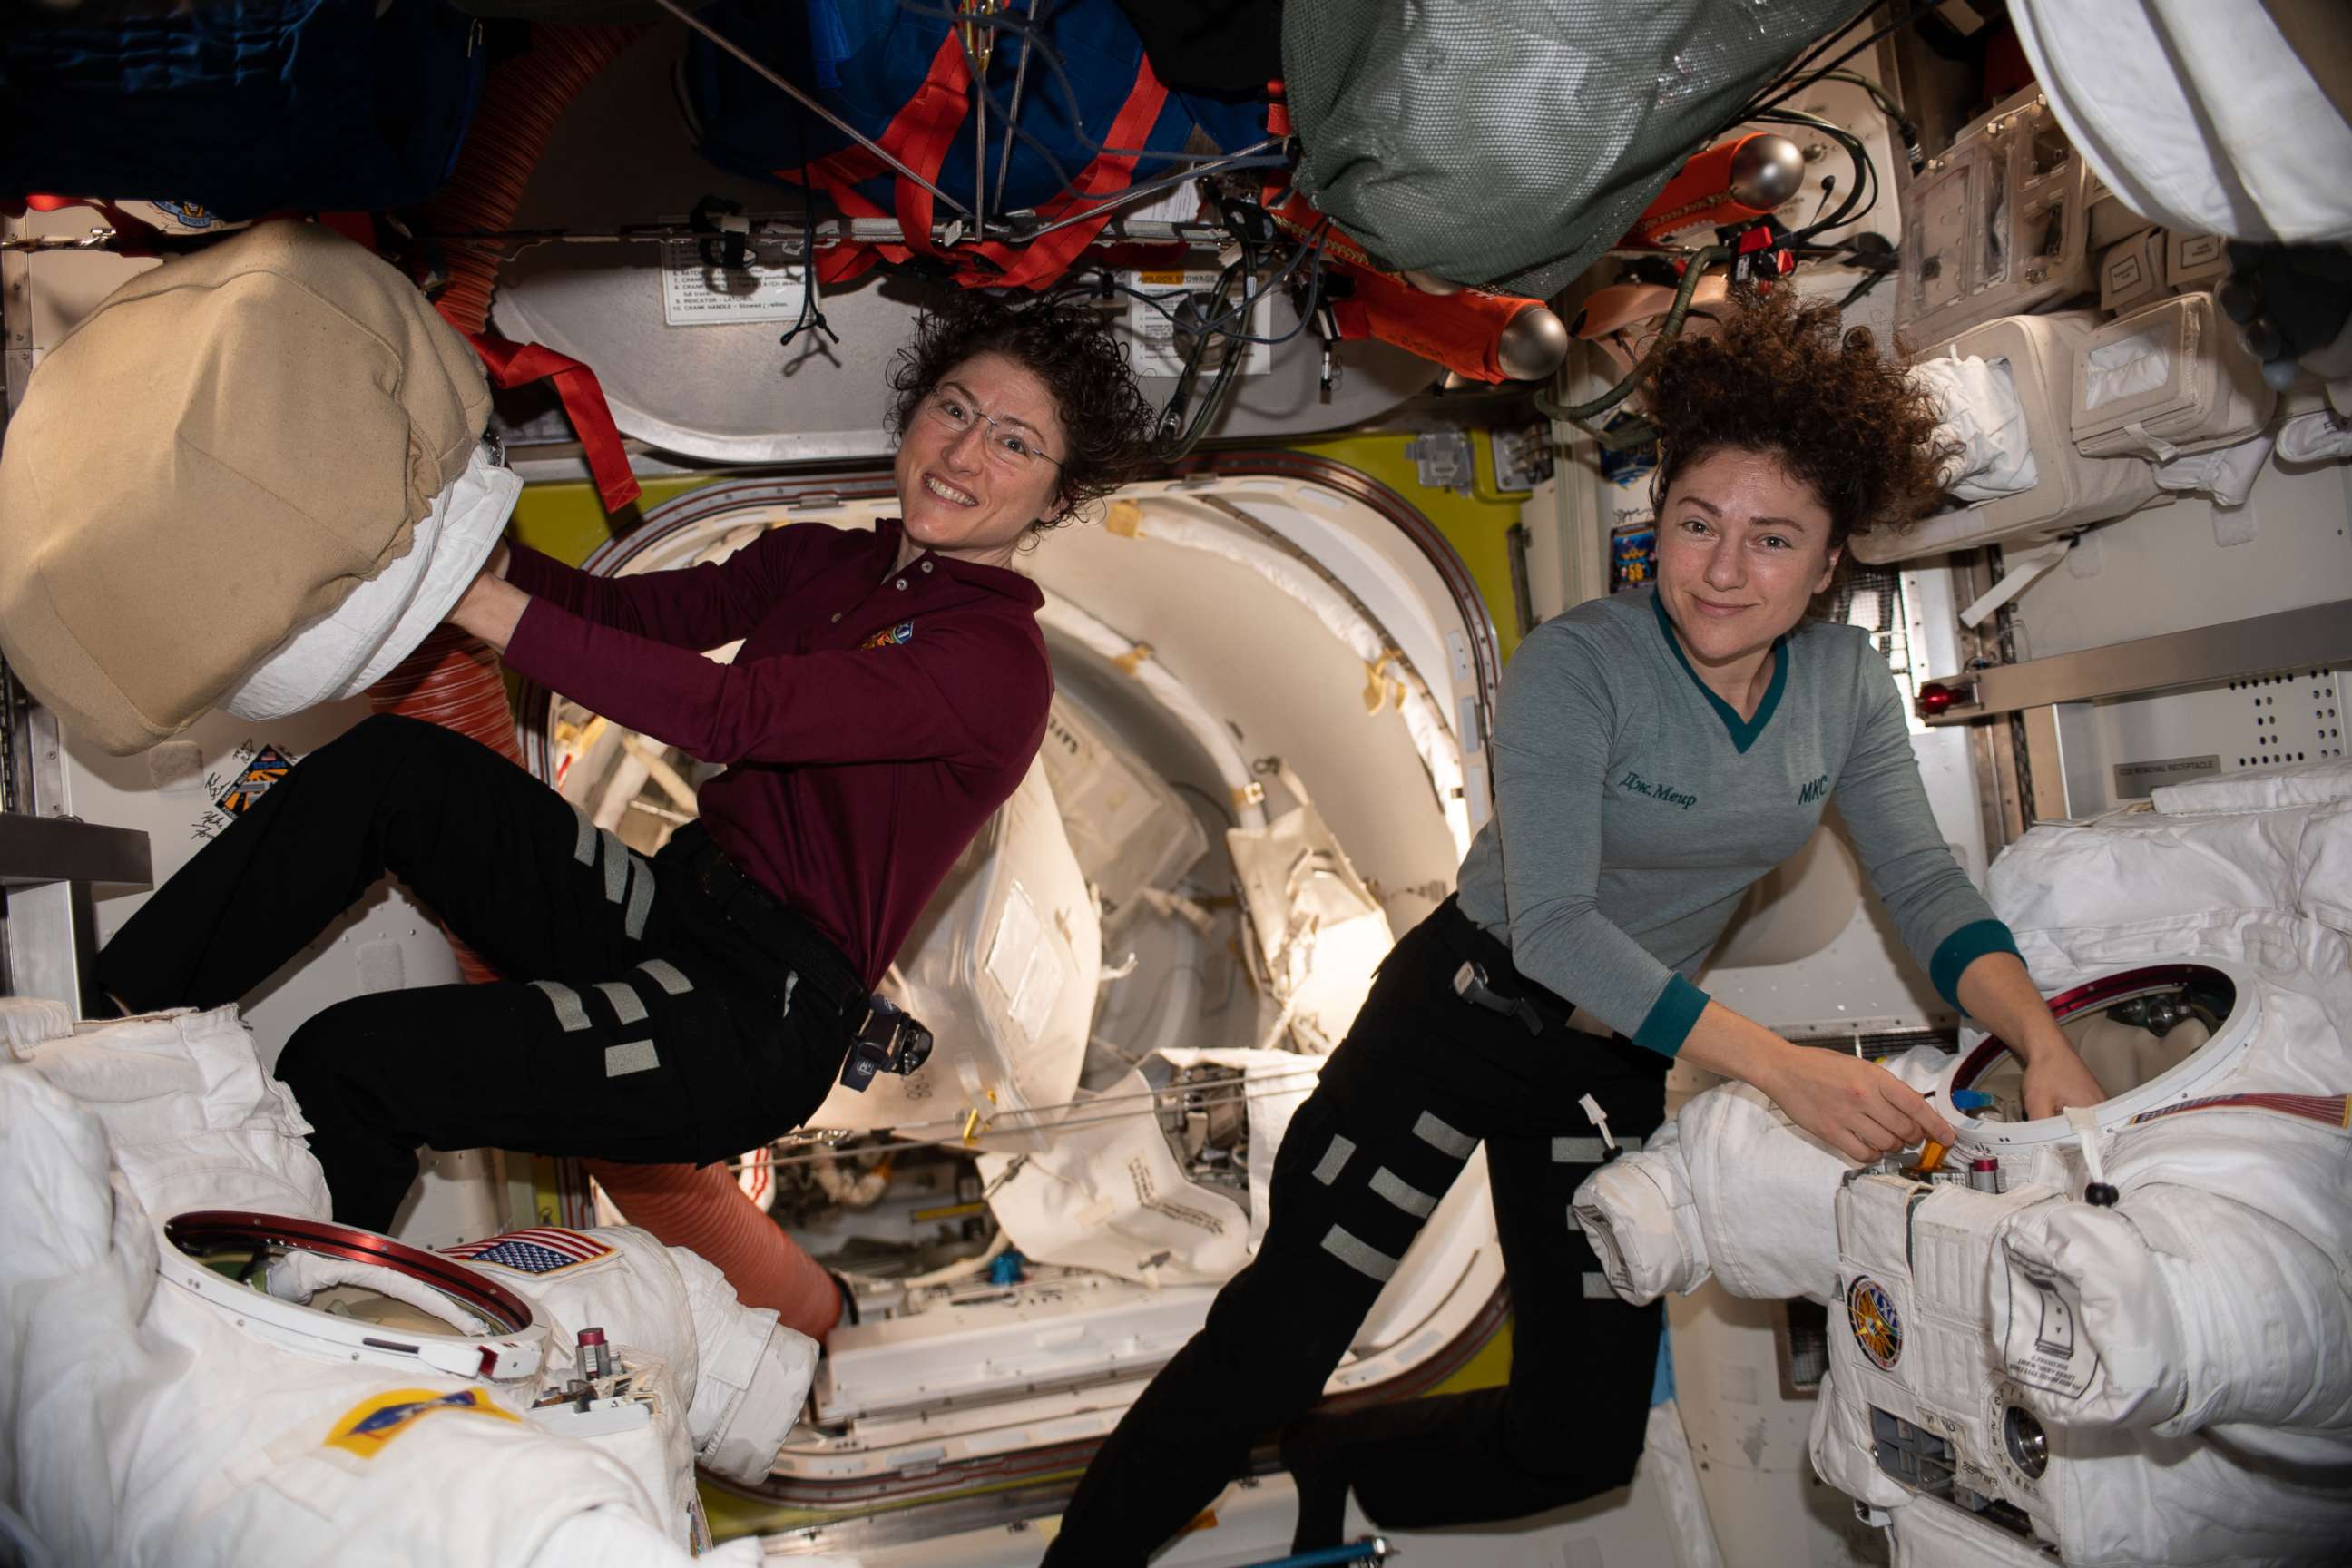 PHOTO: NASA astronauts Christina Koch and Jessica Meir work on their spacesuits ahead of a spacewalk they conducted to install new batteries that store and distribute power collected from solar arrays on the International Space Station, Jan. 15, 2020.